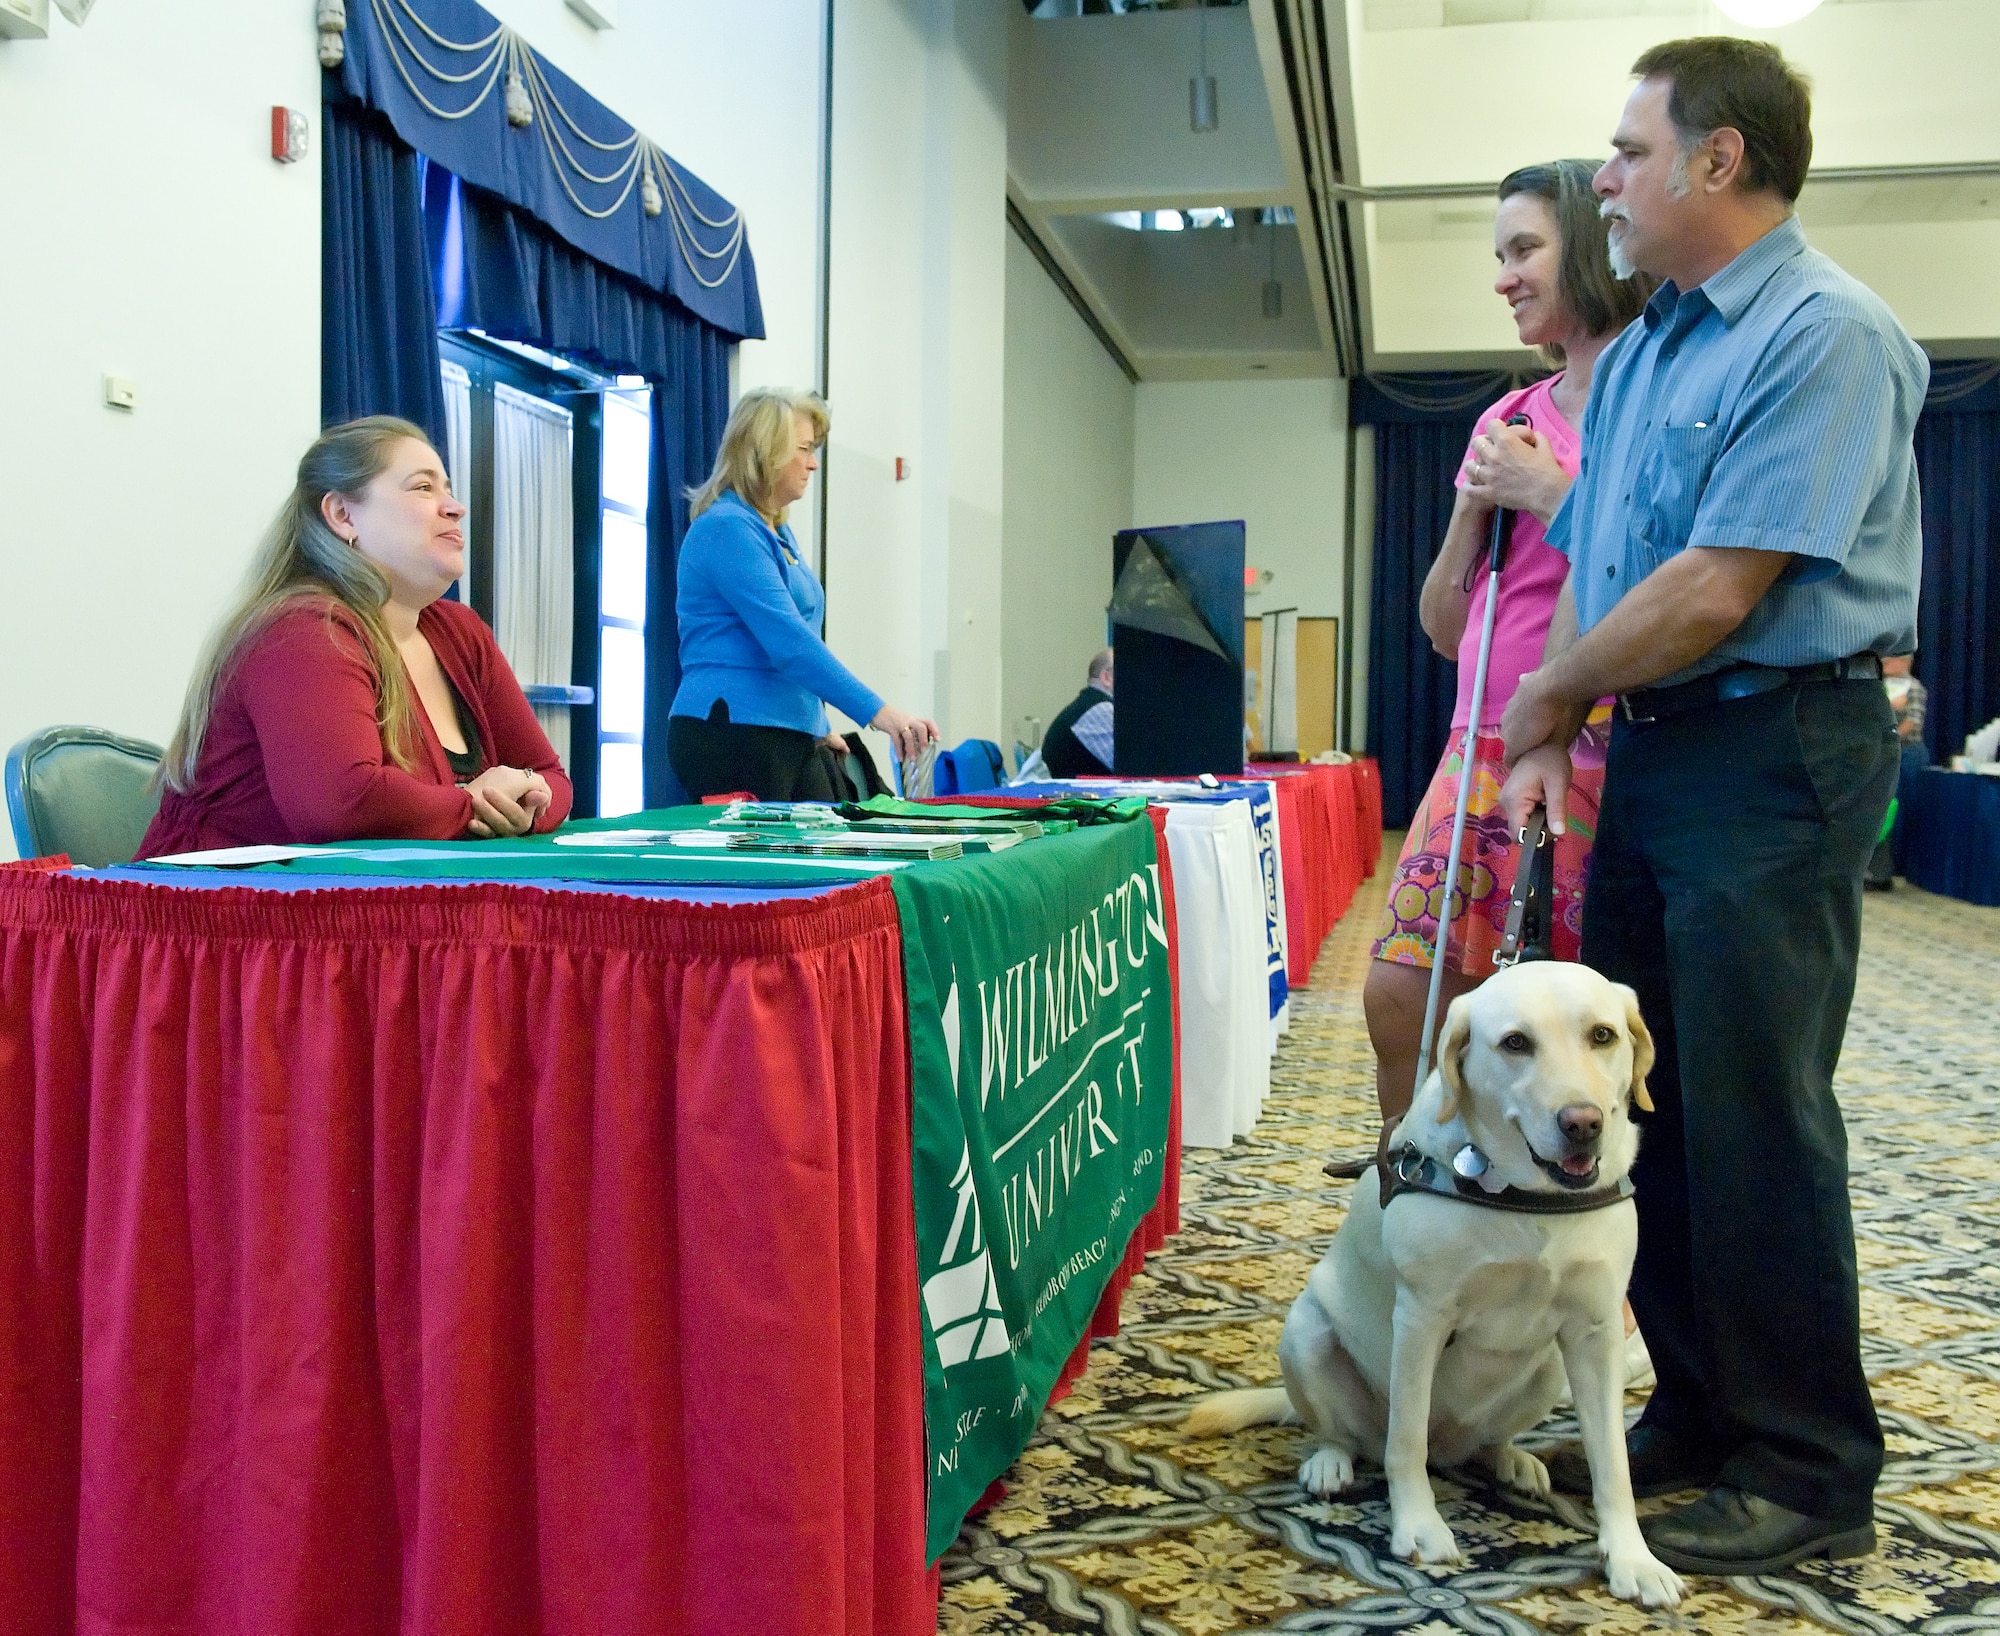 Lloyd Schmitz, National Disability Employment Awareness Month Luncheon guest speaker, right, and his wife Kathleen, talk with Cindy Webb, Wilmington University site associate during the Exceptional Family Member Program Information Fair Oct. 28, 2014, at The Landings on Dover Air Force Base, Del. The Schmitz’s, who are both visually impaired to different degrees, brought Lloyd’s Leader dog, Sophie, a four-year old Yellow Labrador Retriever. (U.S. Air Force photo/Roland Balik)